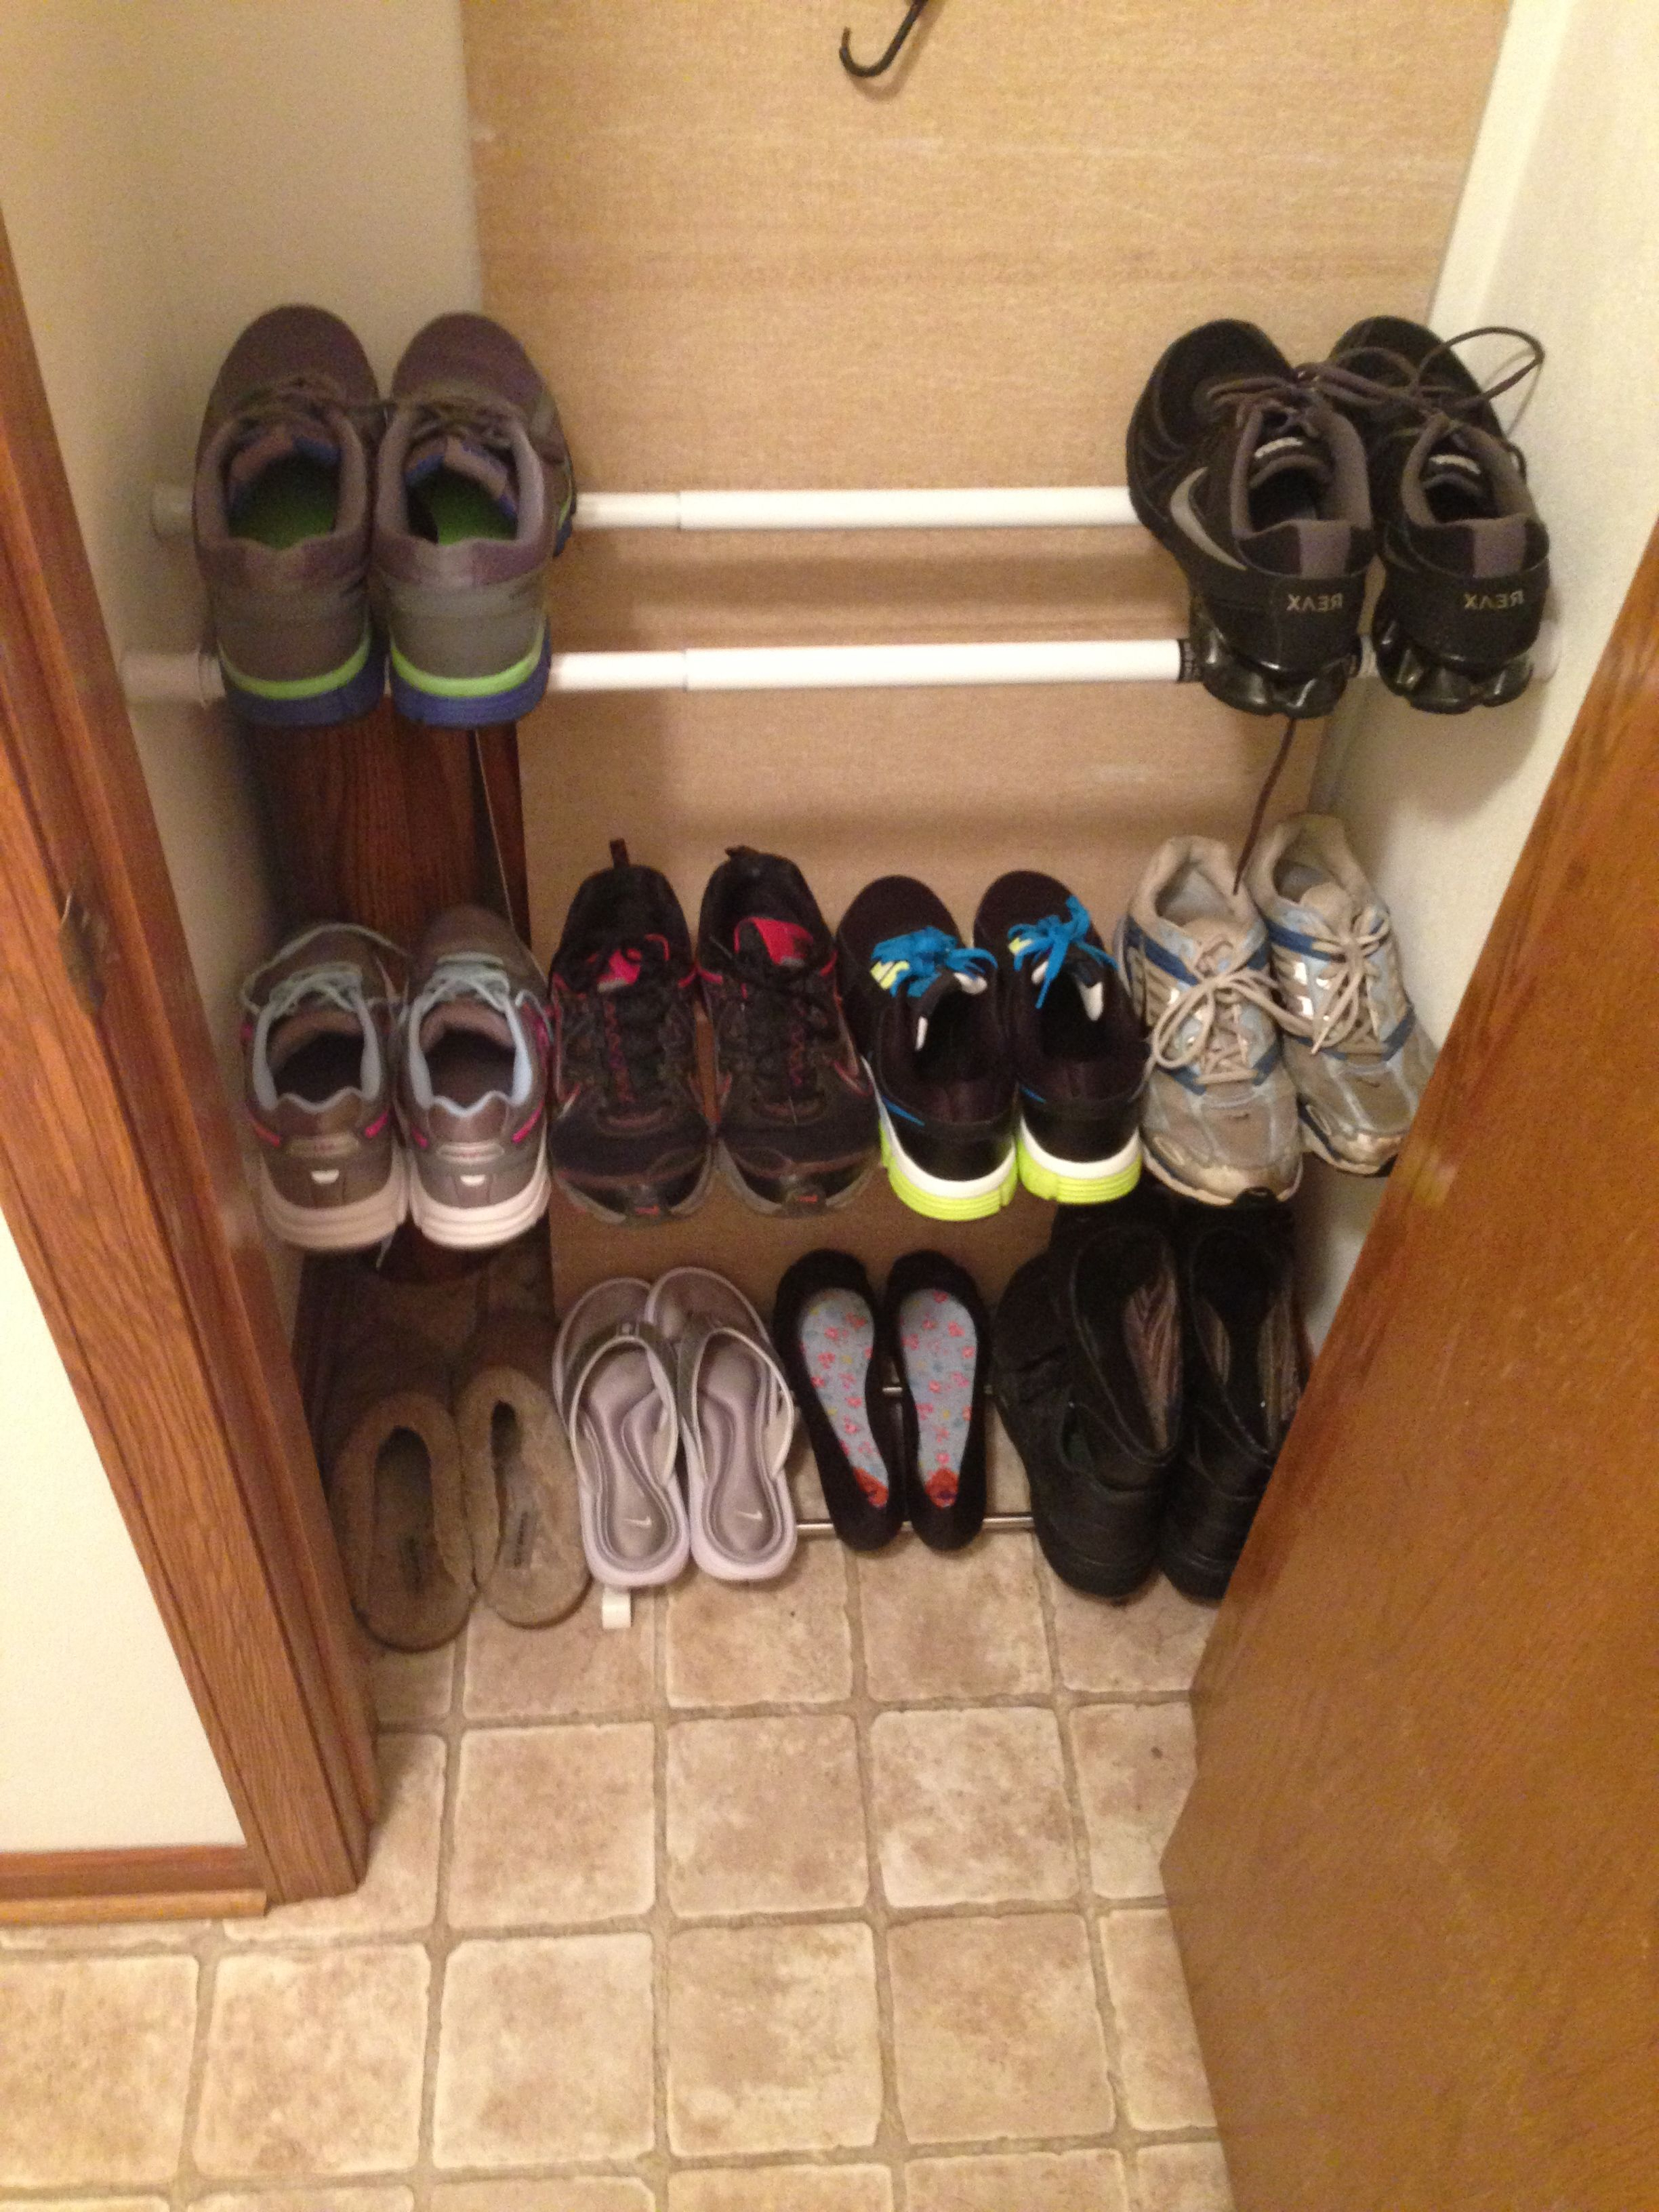 Tension Rods As A Shoe Rack Works Amazing In 2019